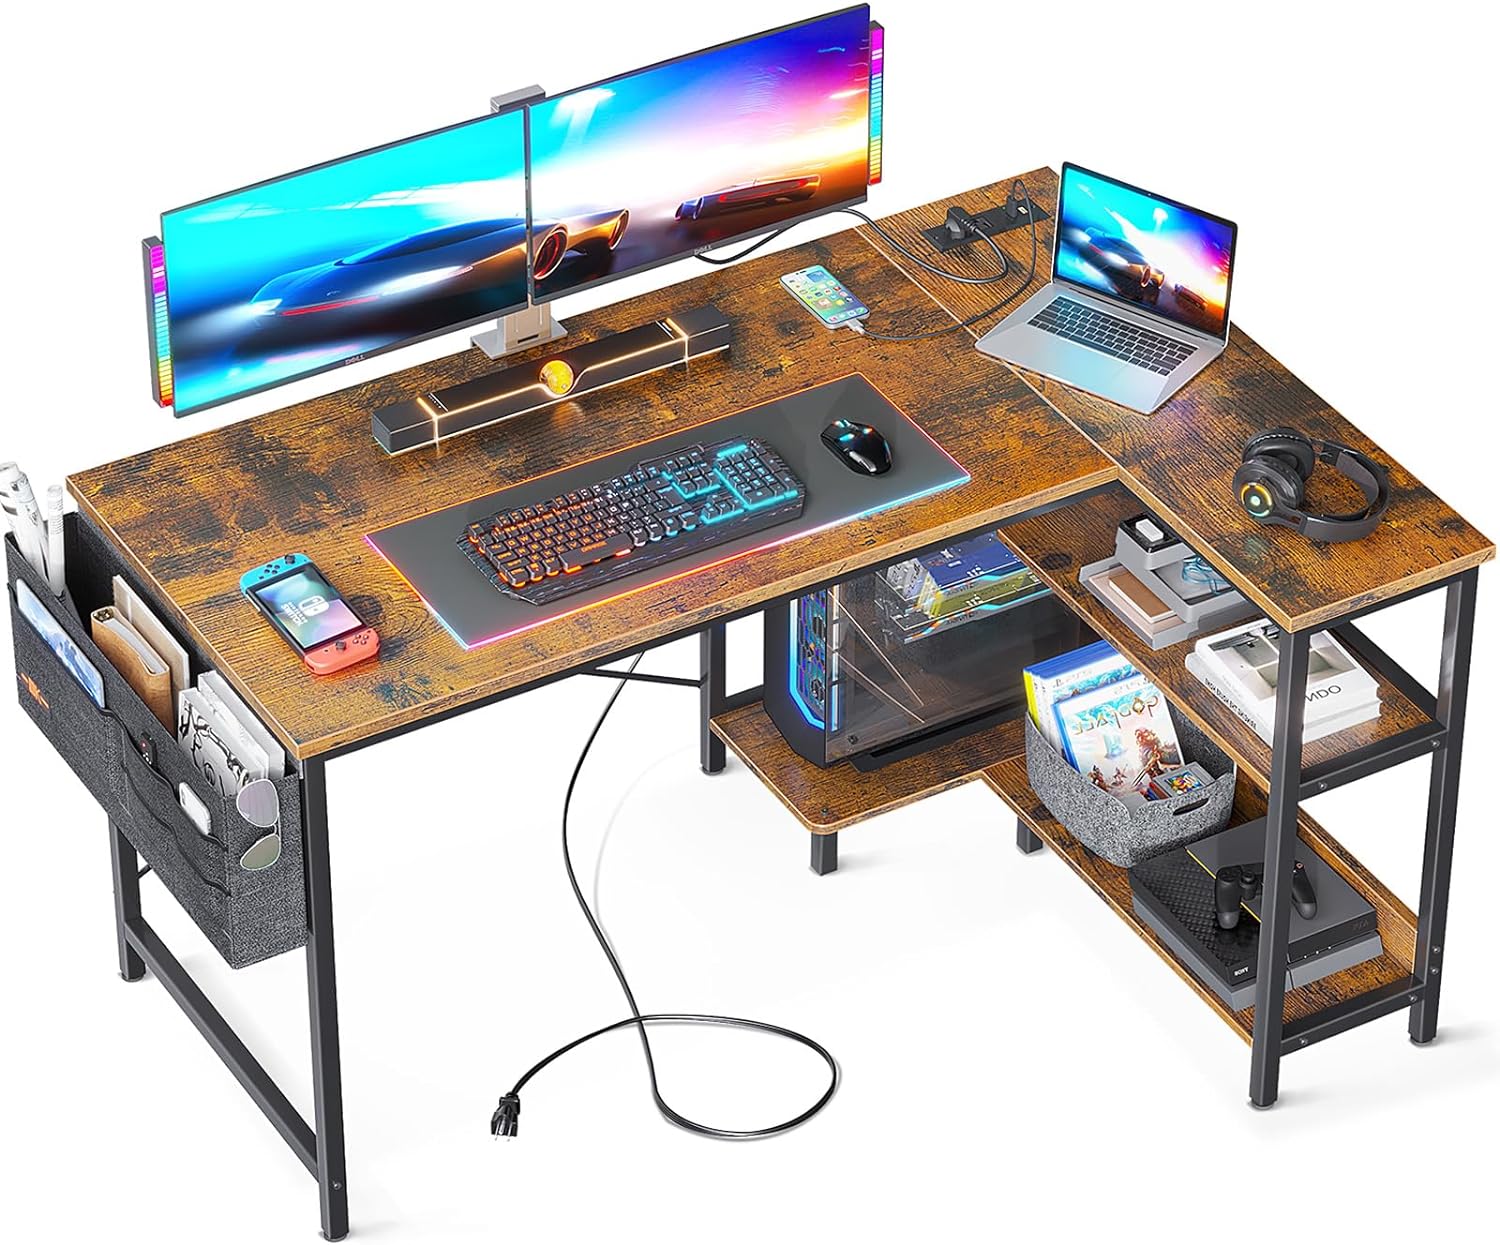 ODK 48 Inch Small L Shaped Gaming Computer Desk with Power Outlets, Reversible Storage Shelves & PC Stand for Home Office, Simple Writing Study Table with Storage Bag for Small Space, Vintage